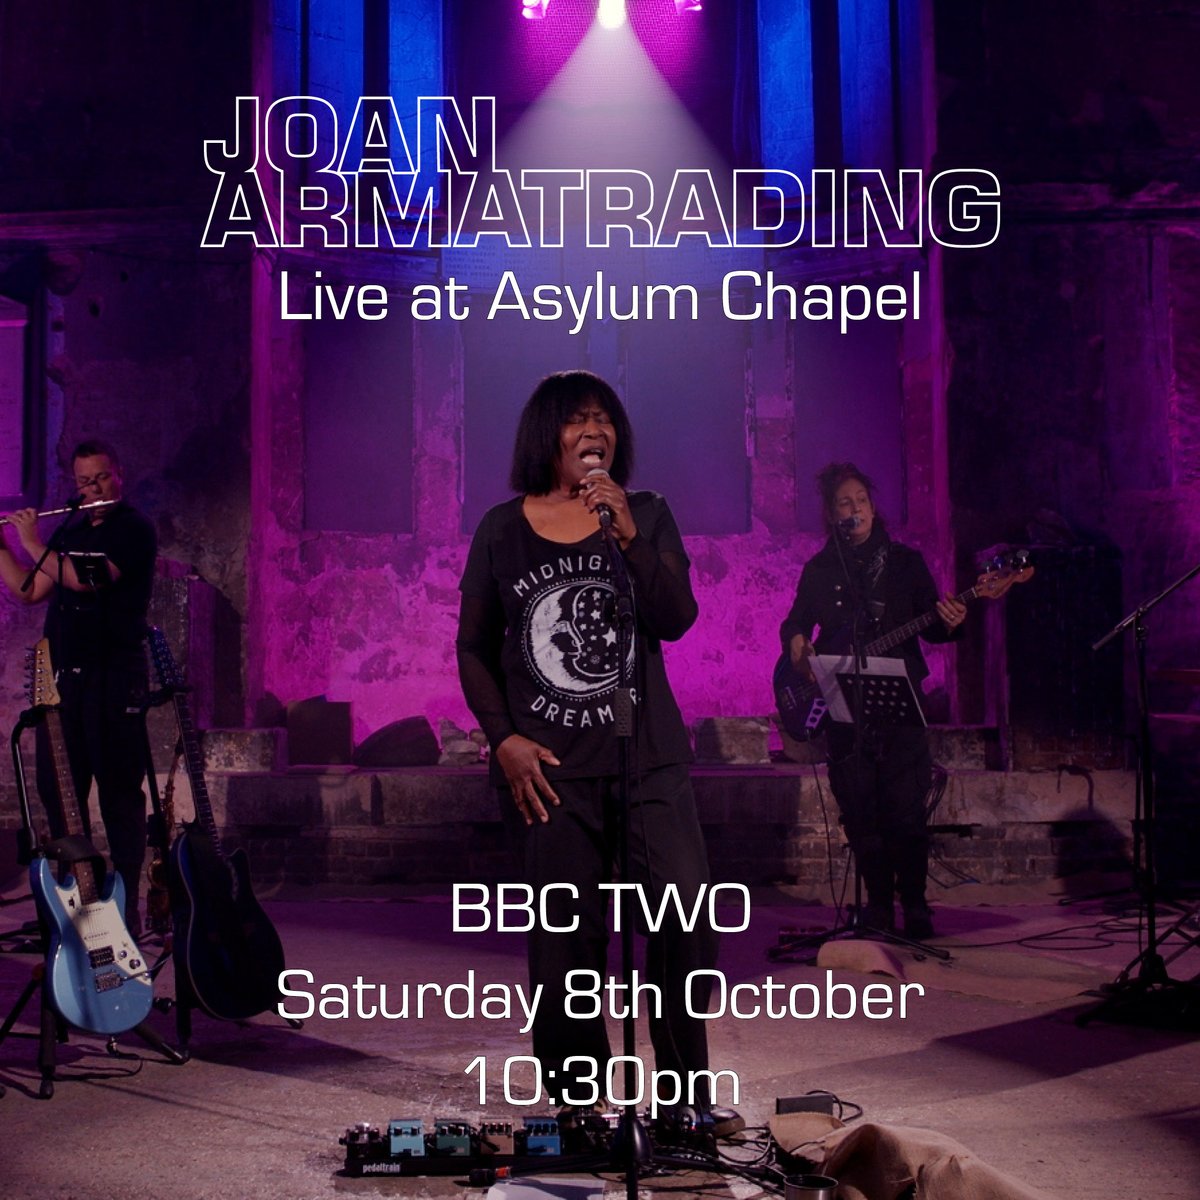 It's on now Live at Asylum Chapel. Yes I'm watching this one as well. BBC TWO 10:30